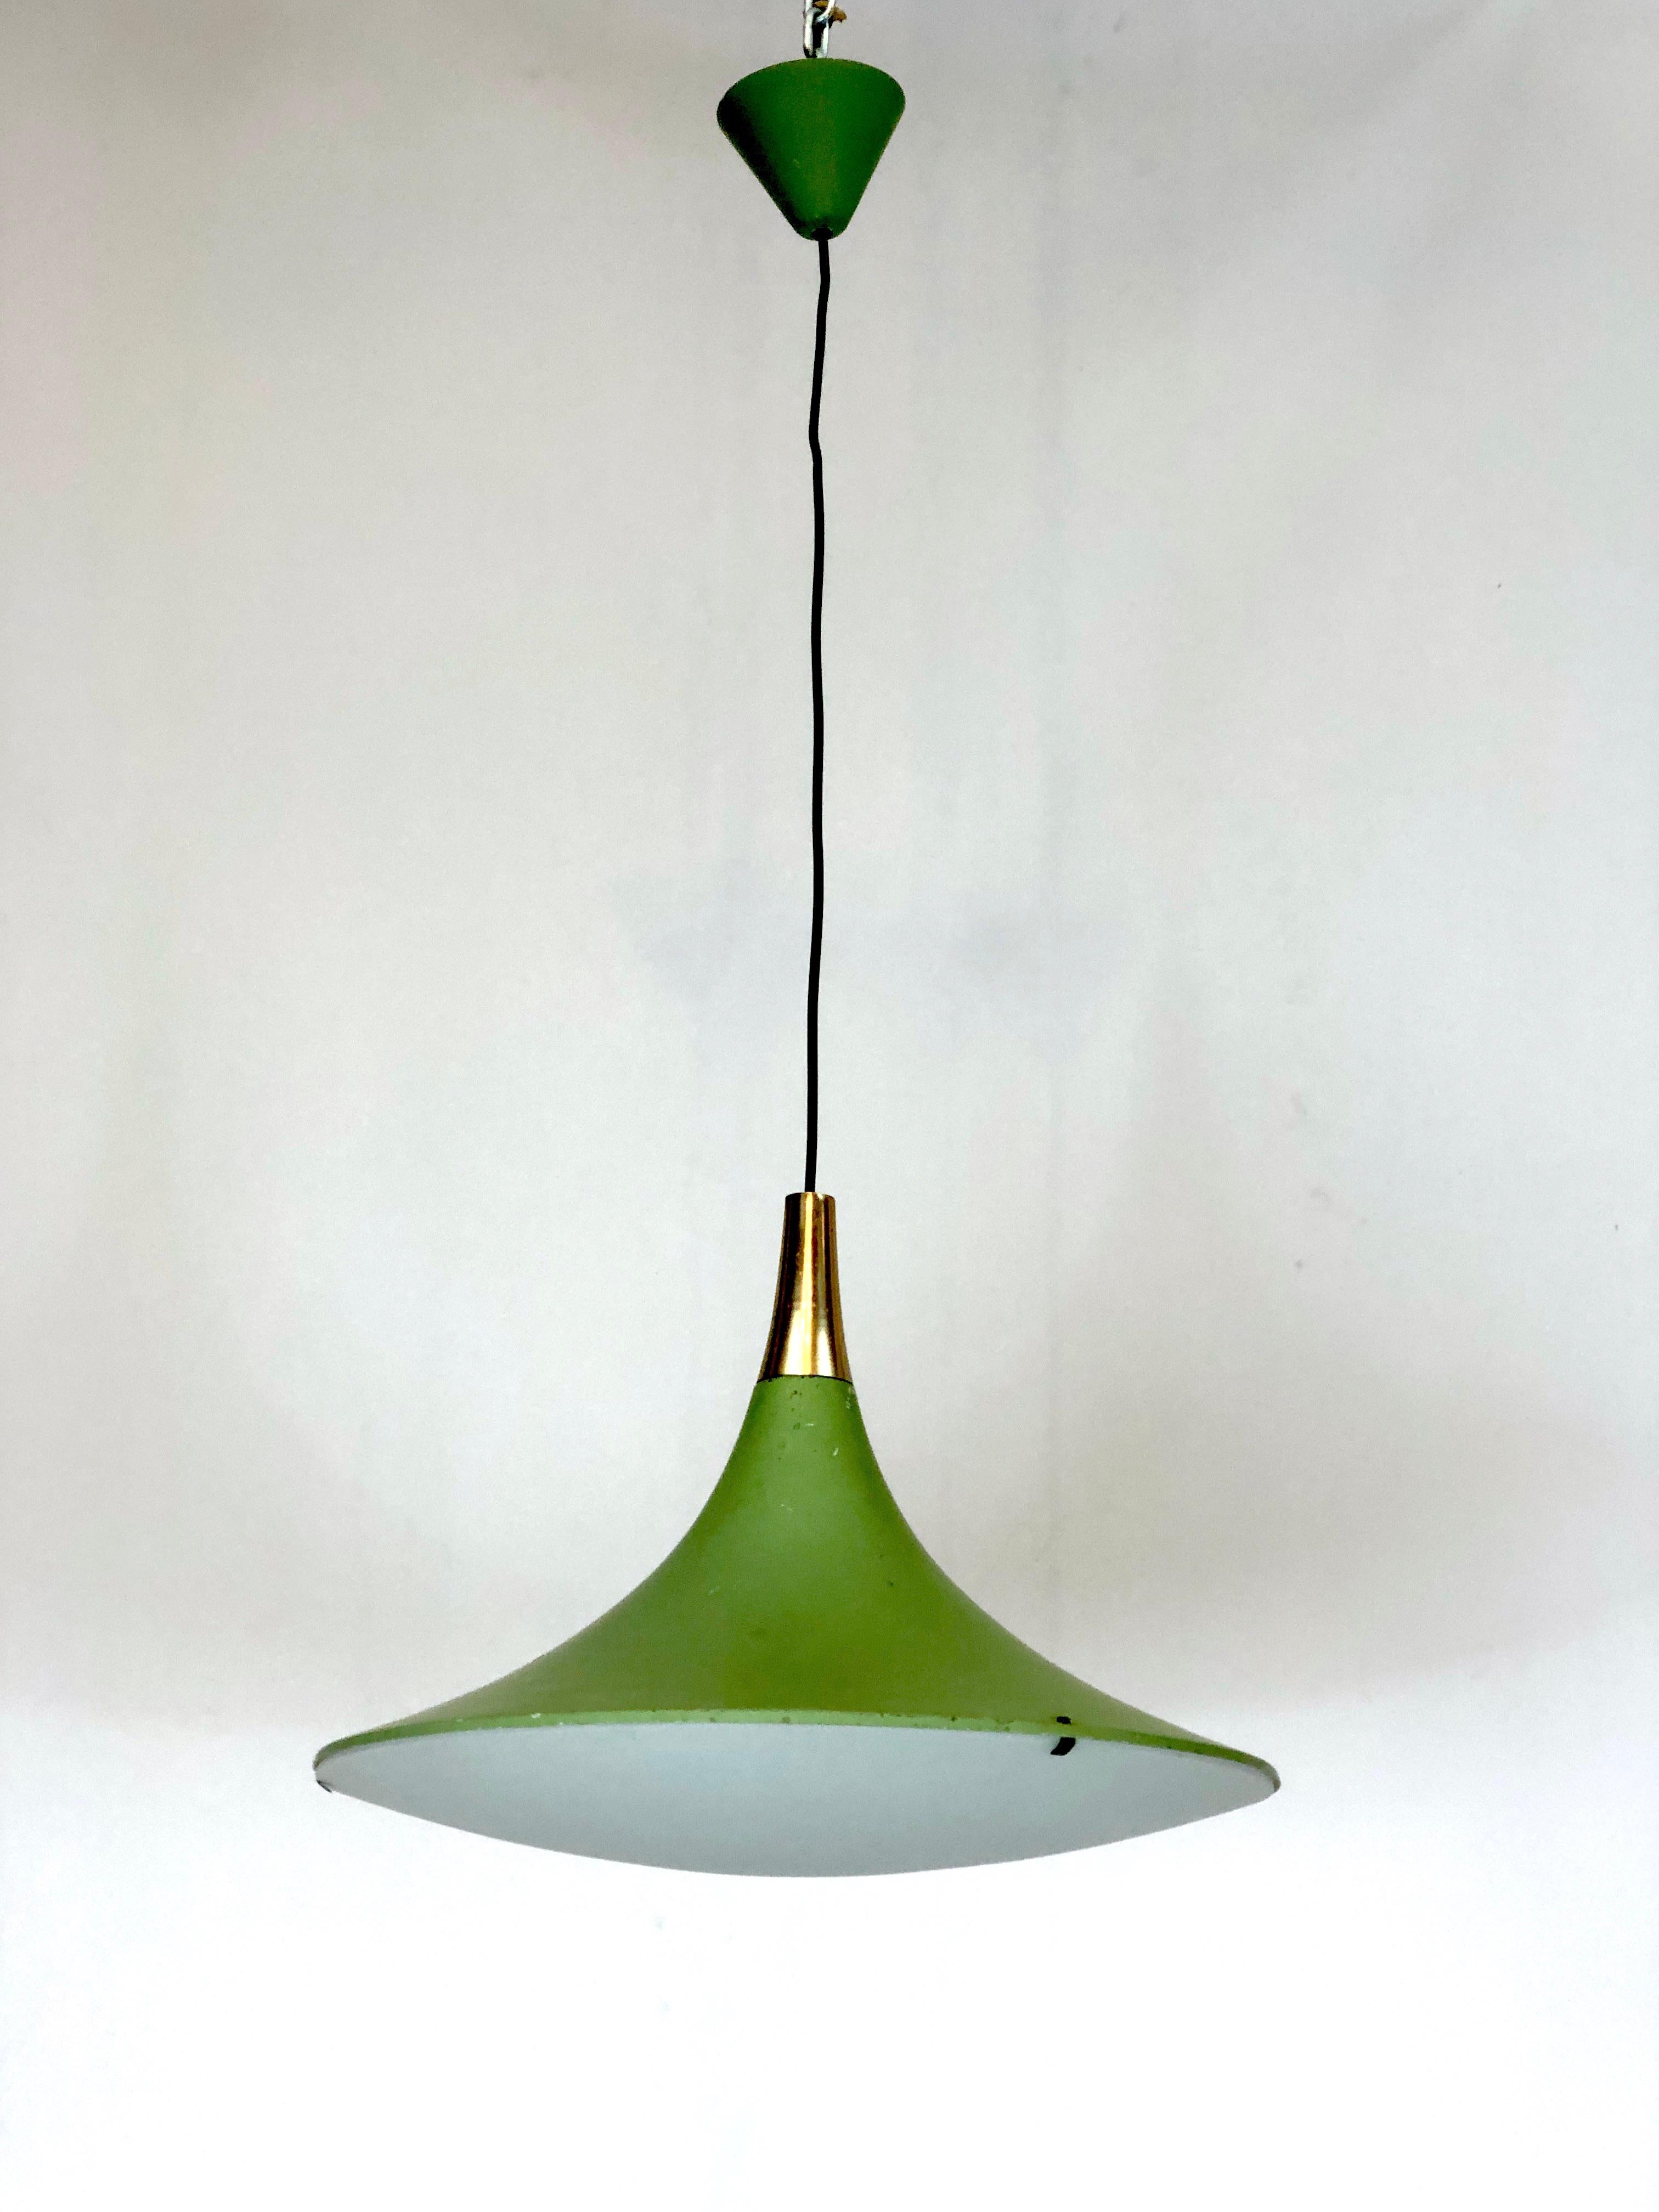 Good vintage condition with normal trace of age and use for this hanging lamp produced by Stilux during the 60s and made from brass, lacquered aluminum and curved glass. Full working with EU standard, adaptable on demand for USA standard.